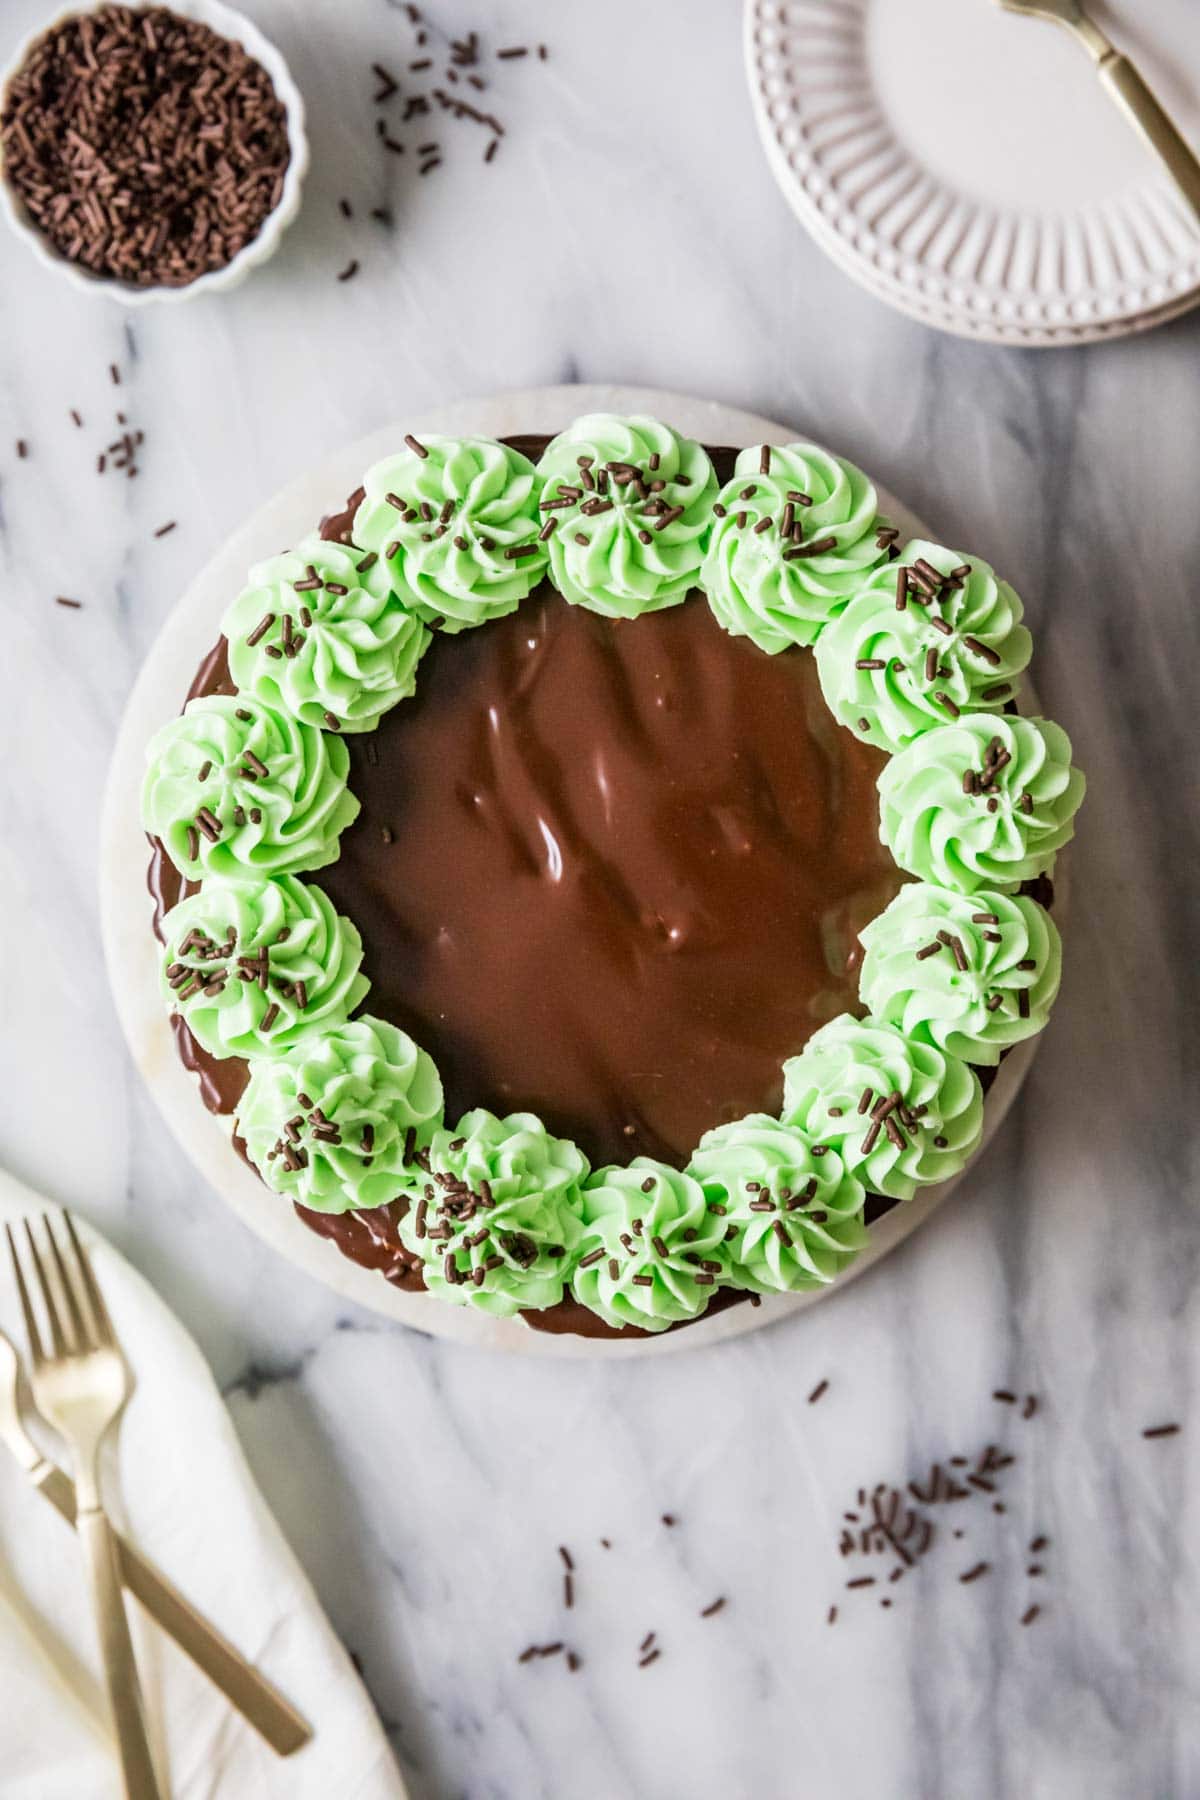 Overhead view of a cake topped with chocolate ganache and piped mint frosting swirls.